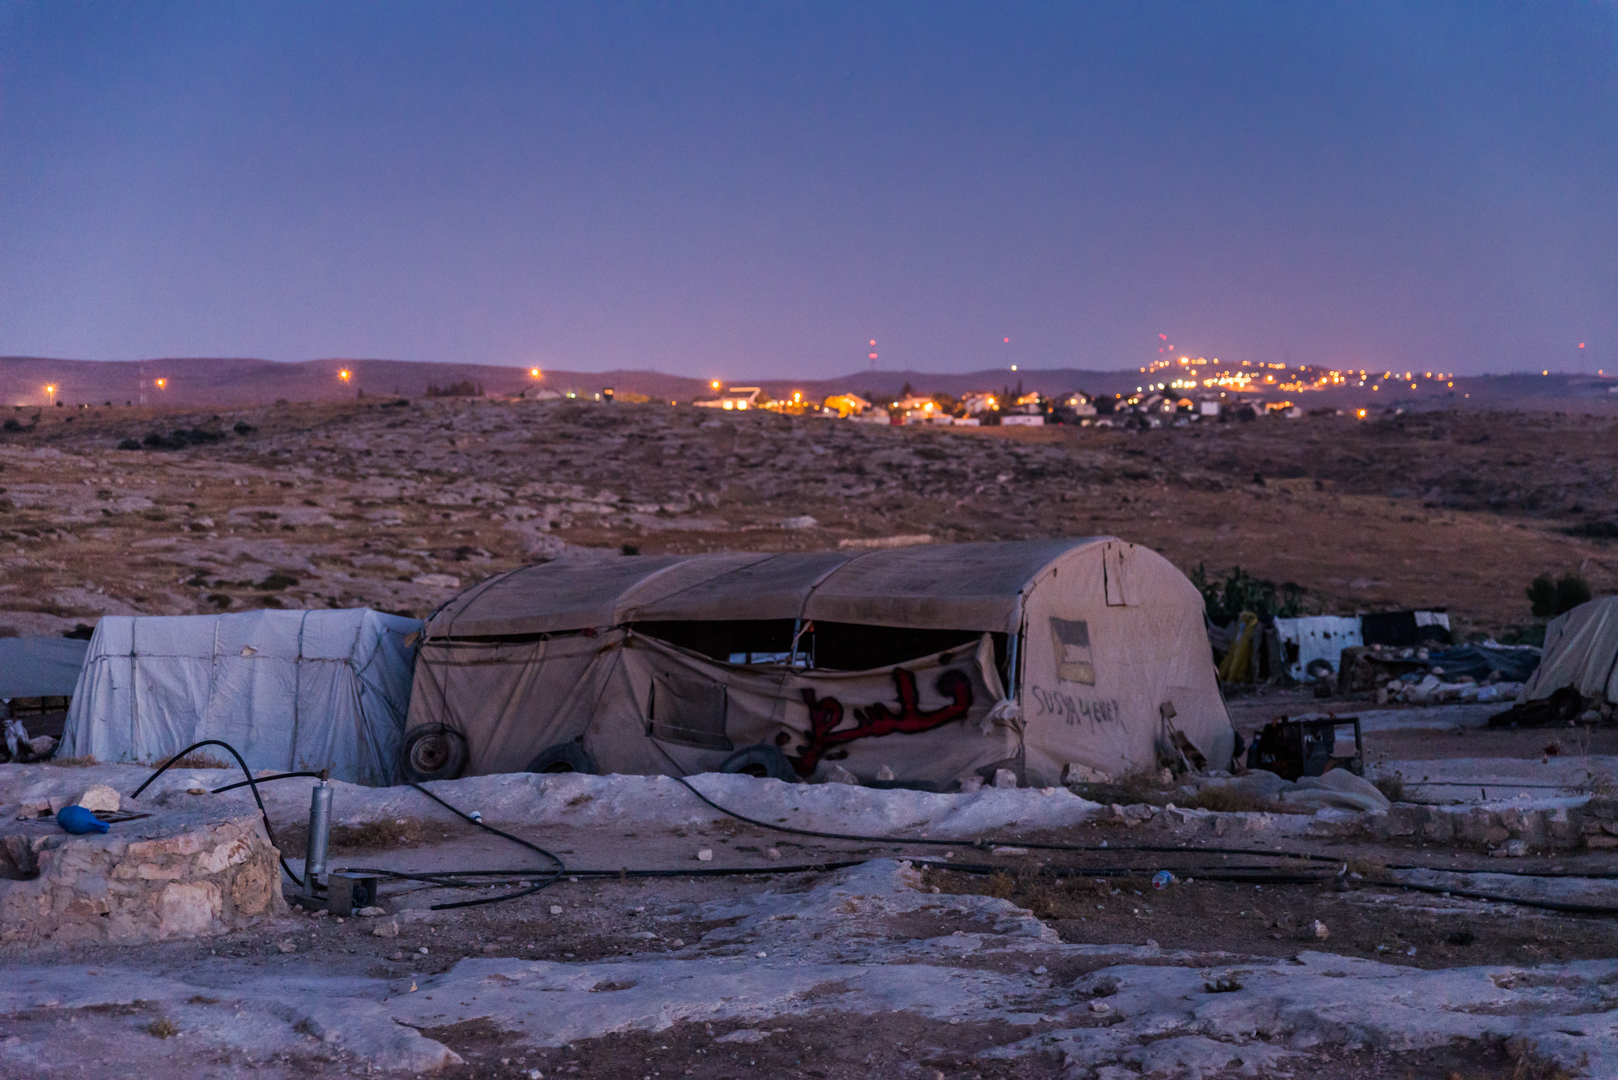 The residents of Susiya live in tents and caves without access to running water or electricity. The nearby illegal Israeli settlement has both in abundance.